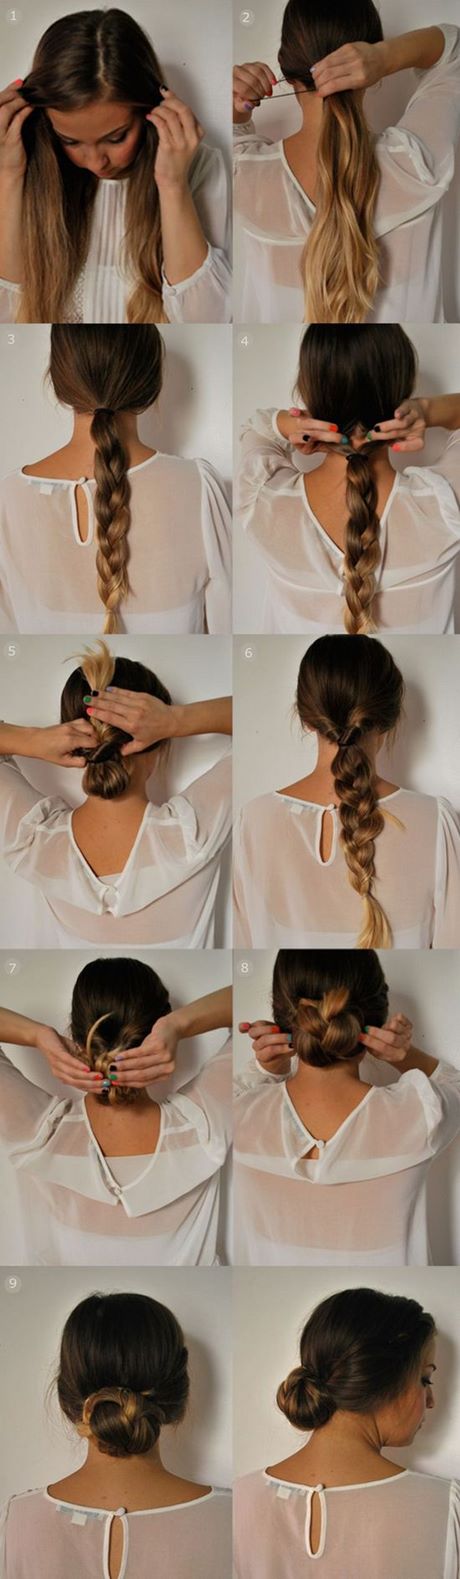 Easy ways to style long hair easy-ways-to-style-long-hair-97